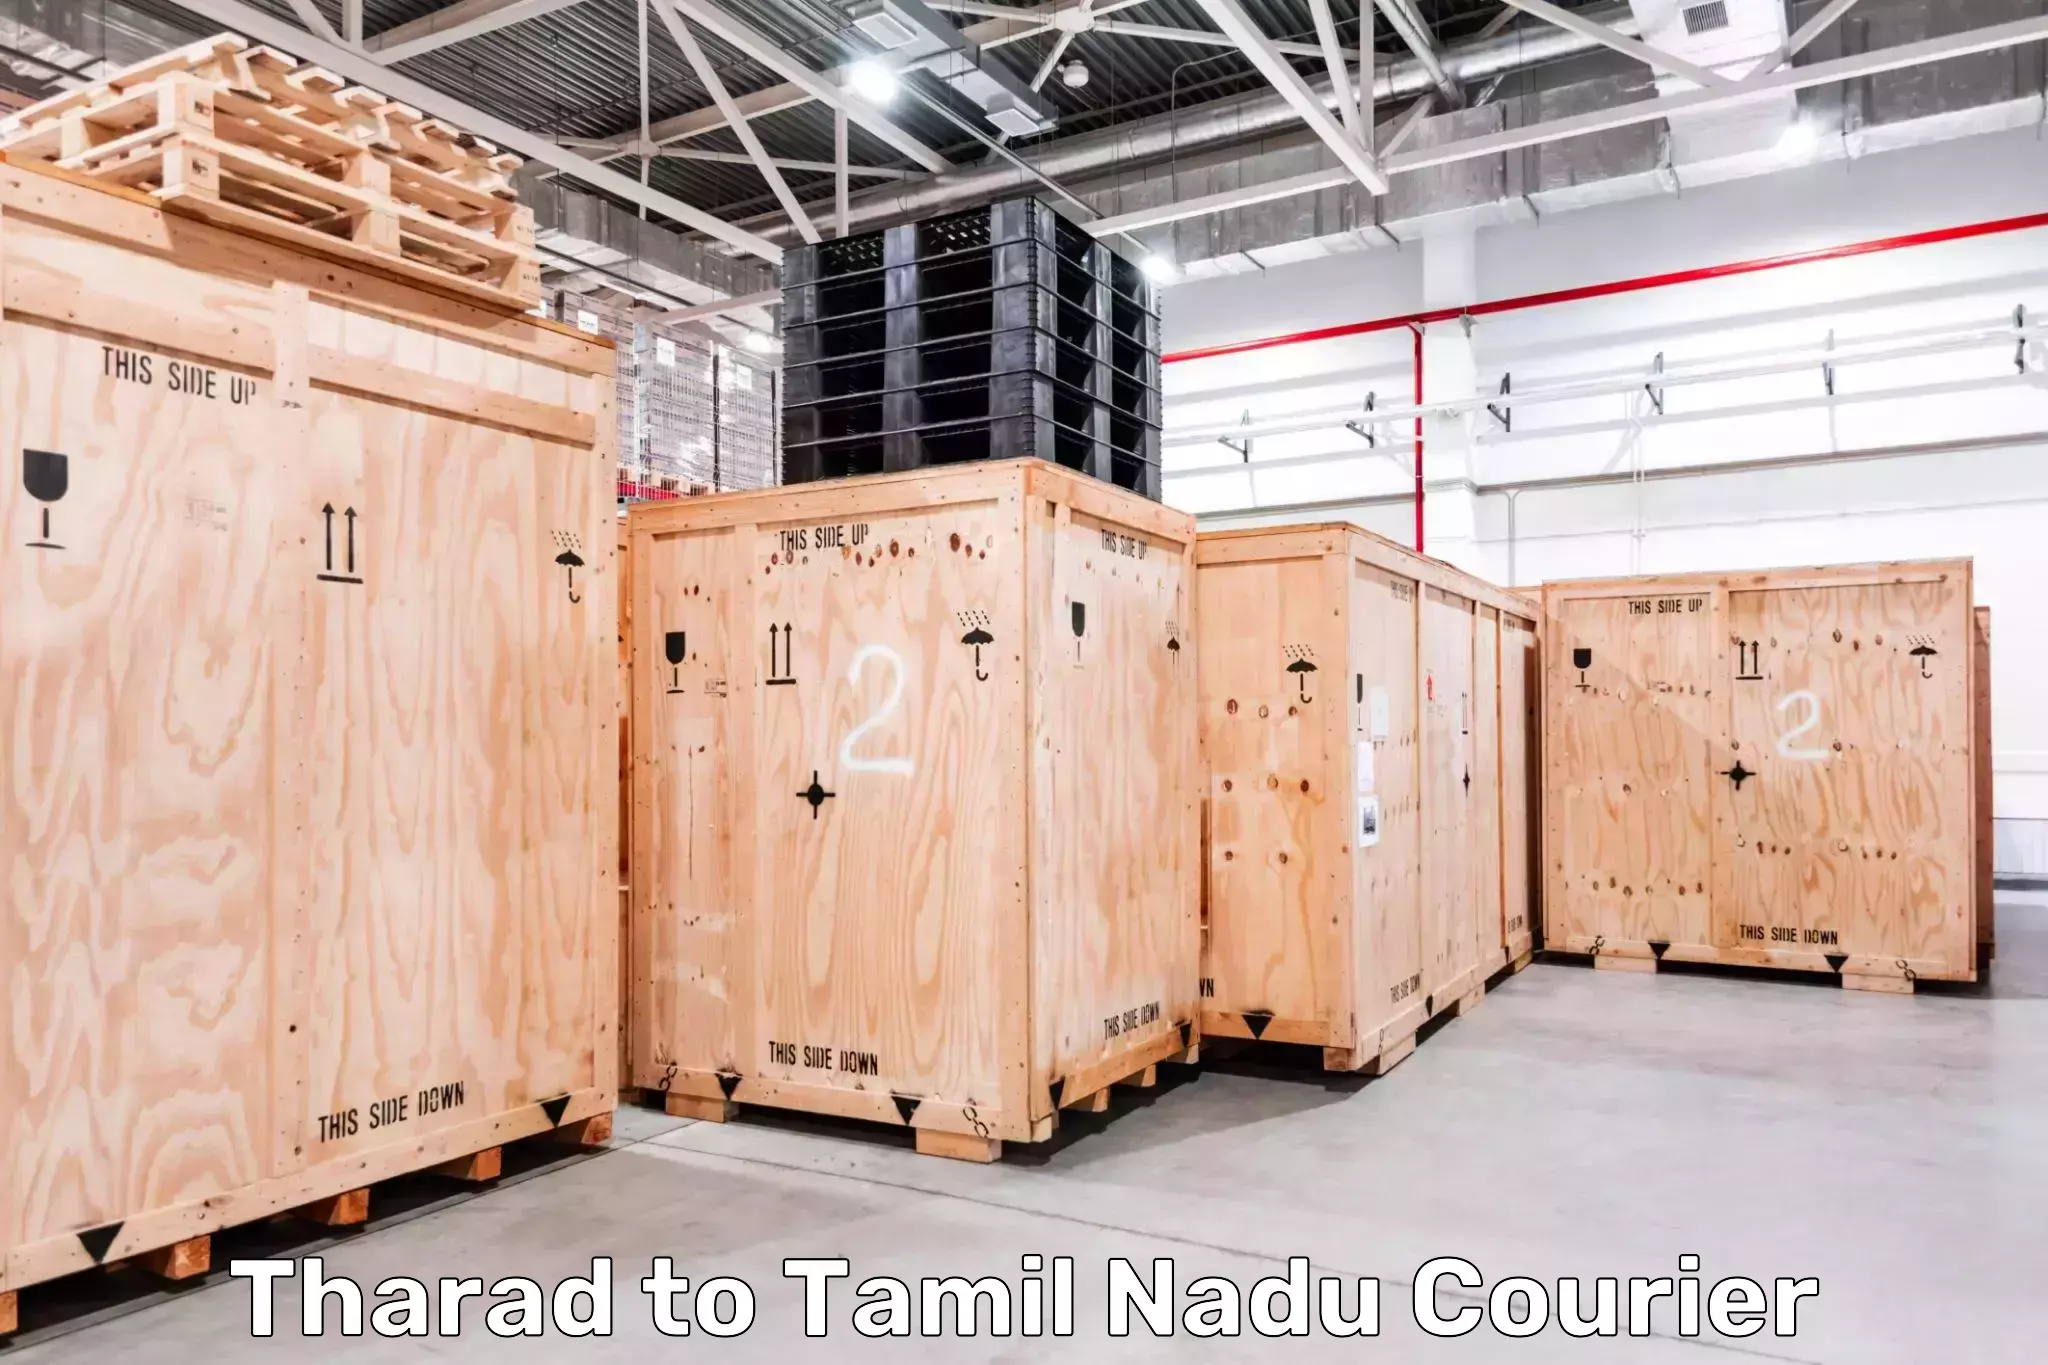 Courier service partnerships Tharad to Tamil Nadu